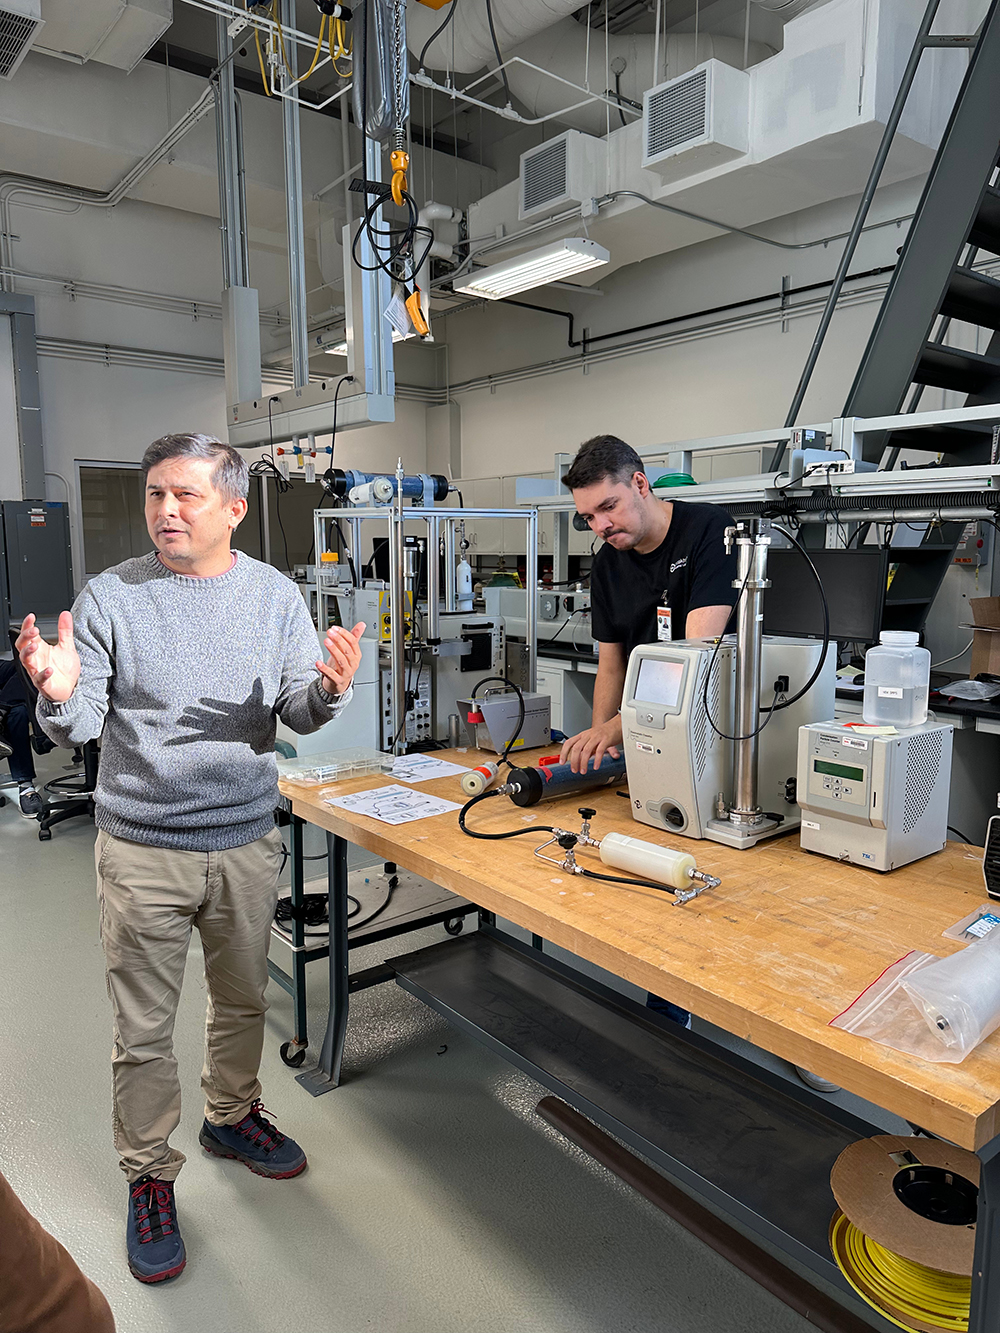 Ashish Singh gestures with his hands while Delano Campos de Oliveira stands behind a table and works with a scanning mobility particle sizer calibration system. Photo is by Olga Mayol-Bracero, Brookhaven National Laboratory.